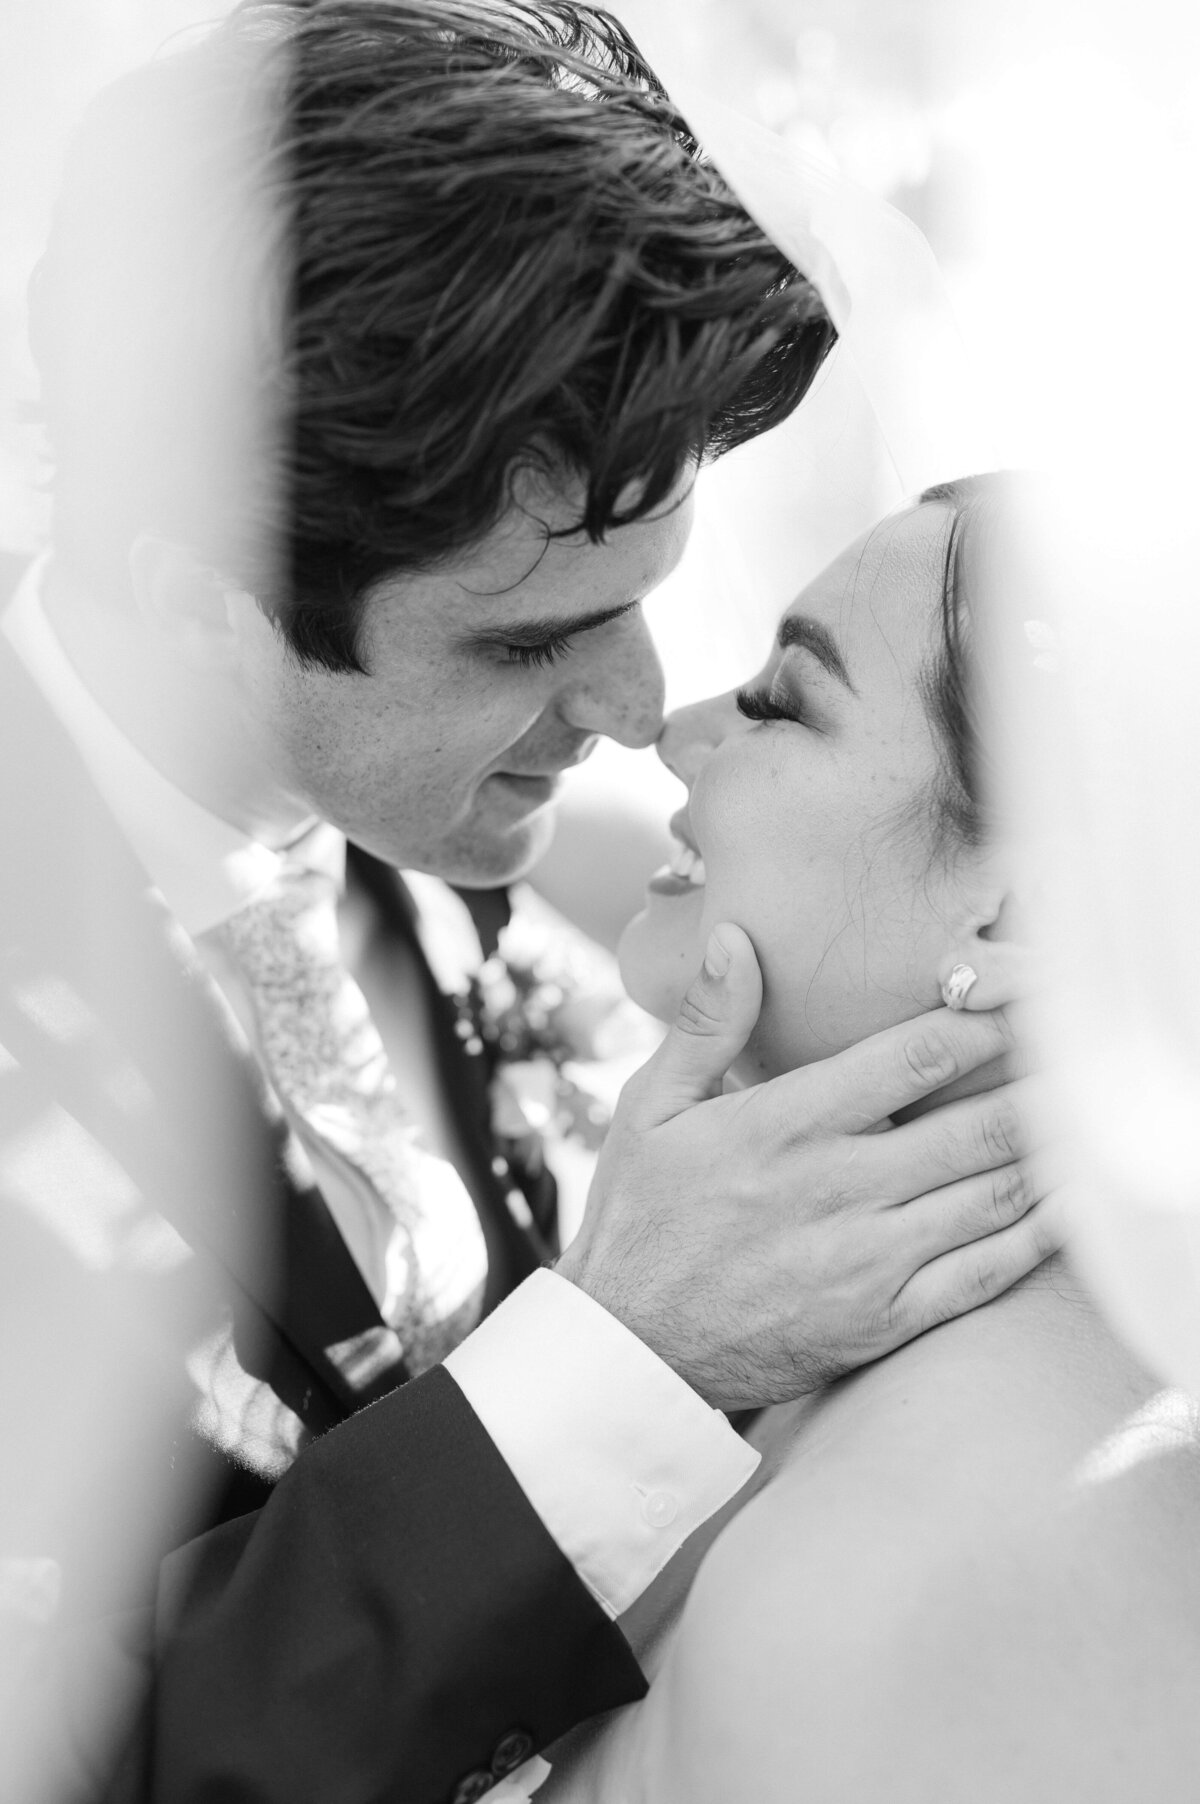 B&W image of a couple passionately kissing underneath a wedding veil.